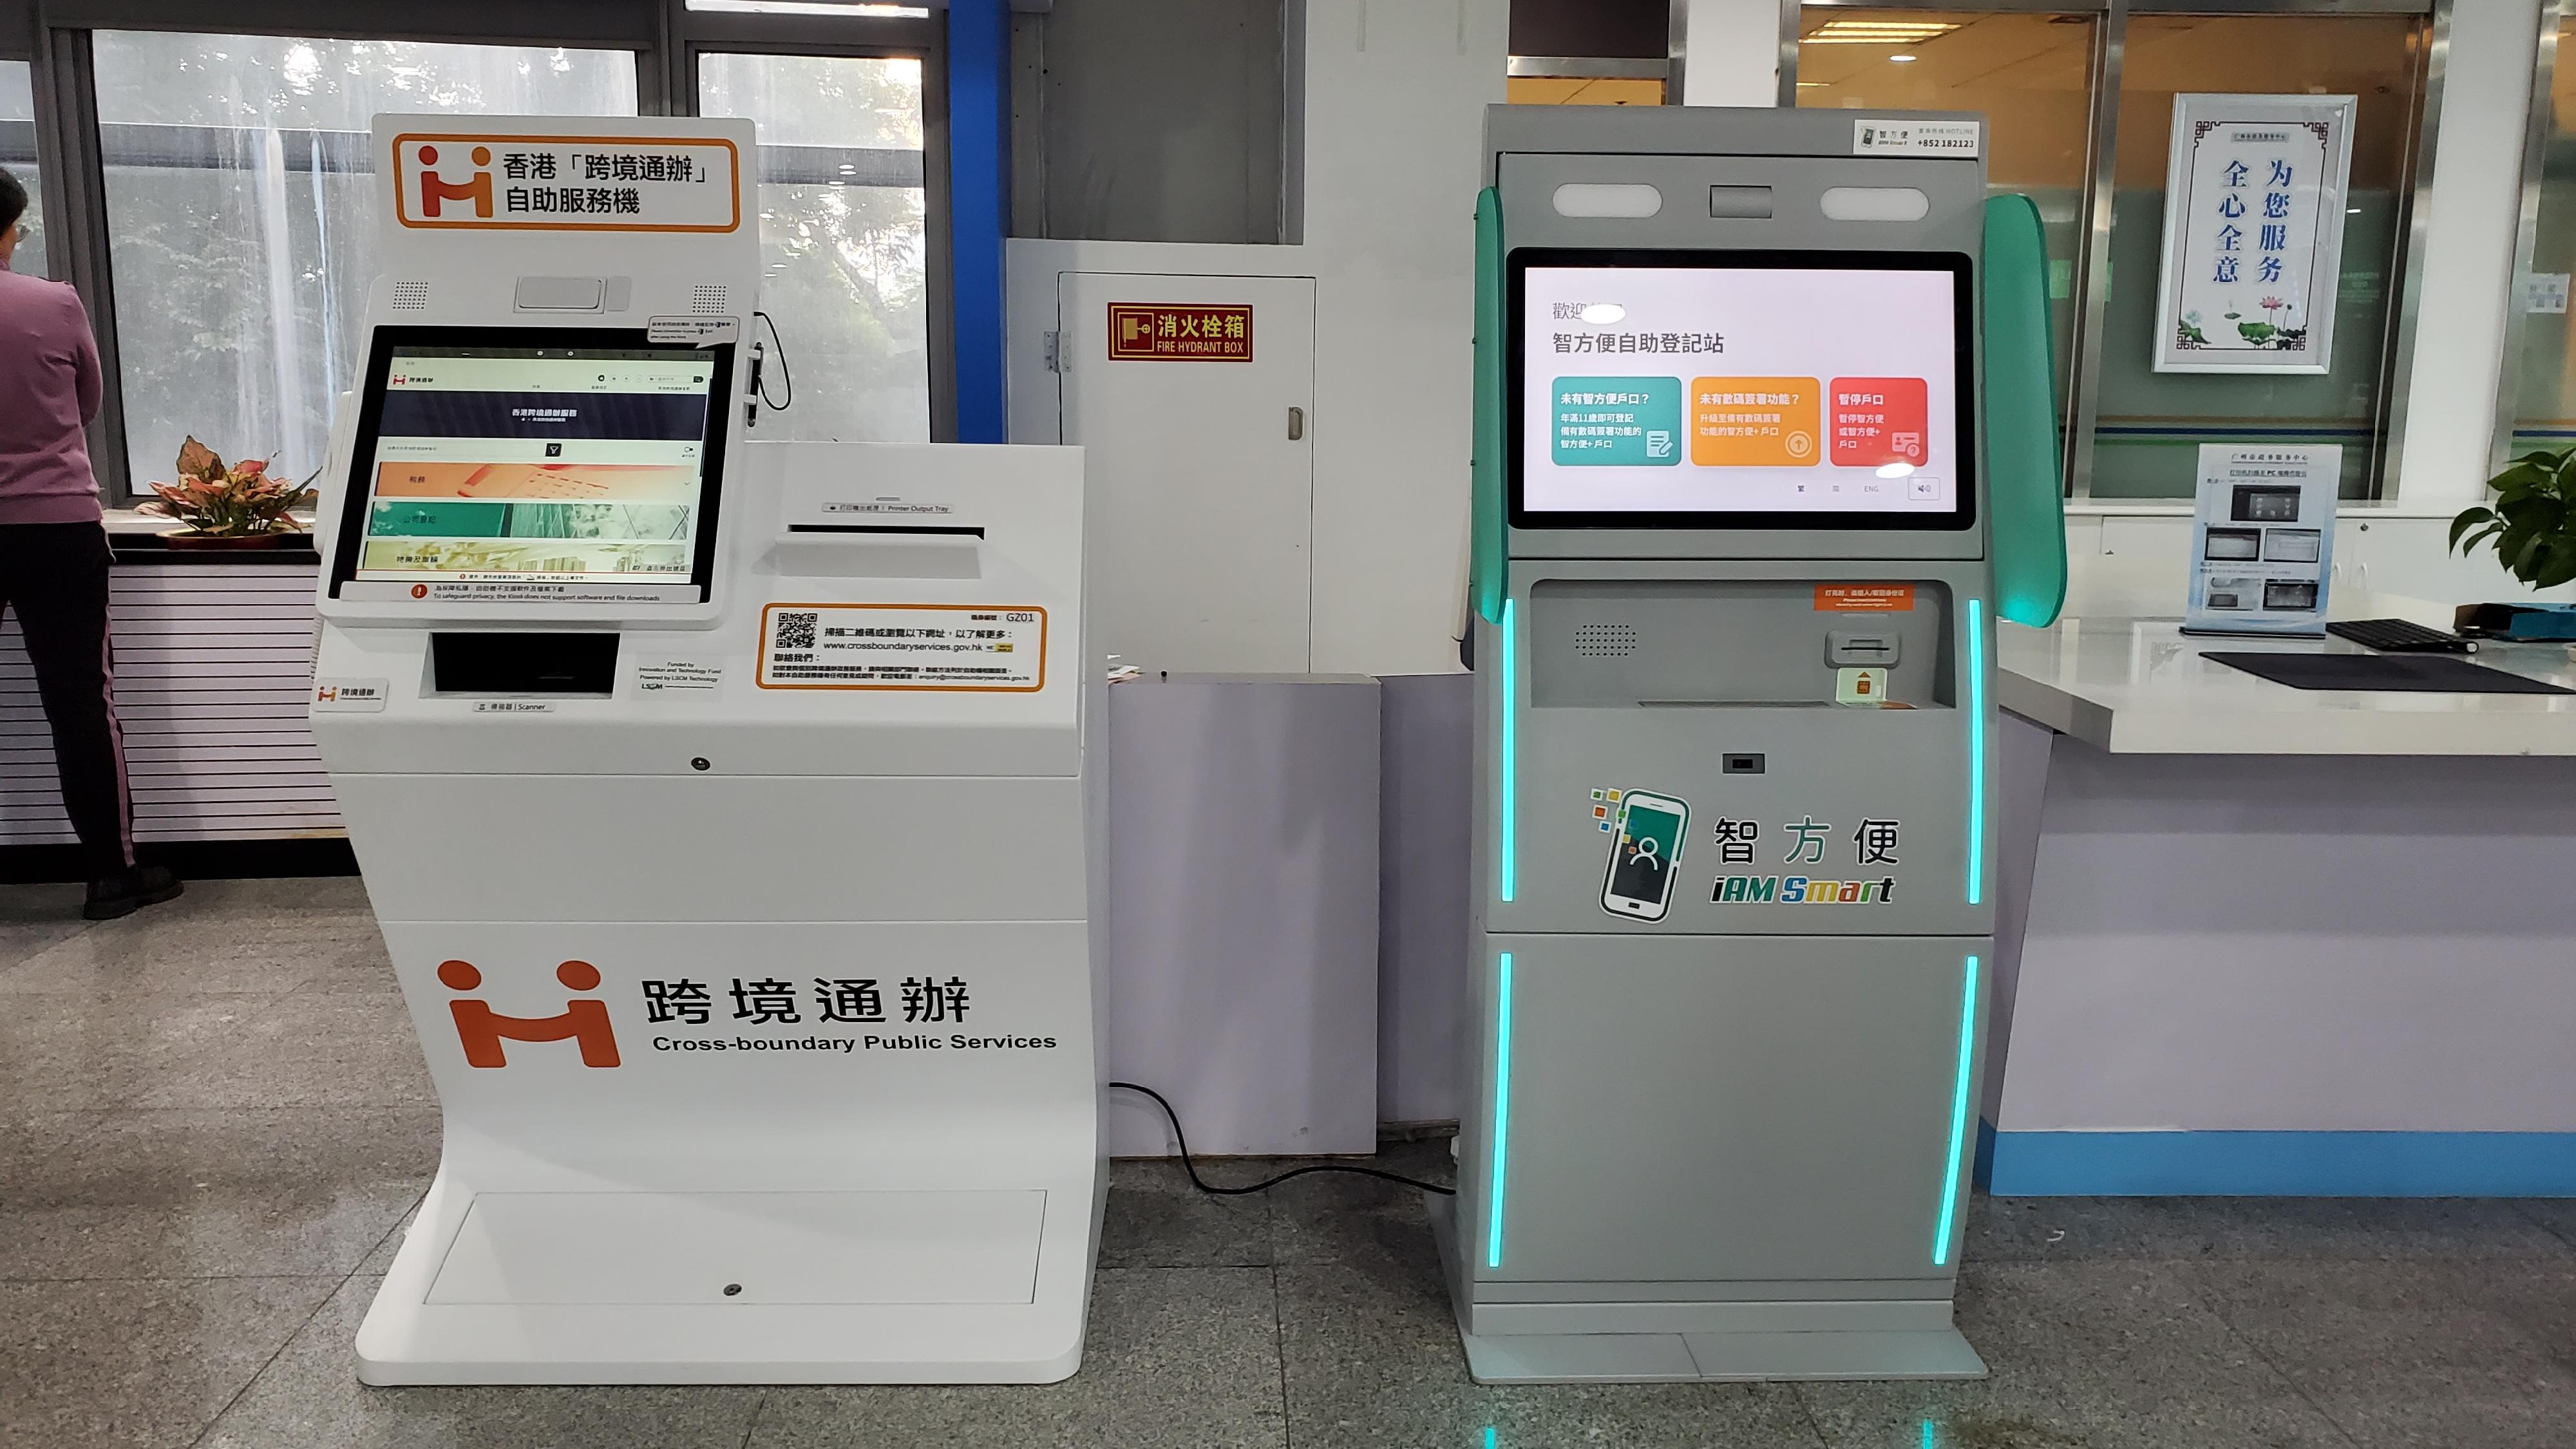 The Hong Kong Special Administrative Region Government has set up a Hong Kong Cross-boundary Public Services self-service kiosk (left) on the third floor of the Guangzhou Municipal Government Service Center, Zhujiang New Town, Guangzhou. Members of the public can also use the "iAM Smart" self-registration kiosk (right) at the same location to register for, or upgrade to, "iAM Smart+". 